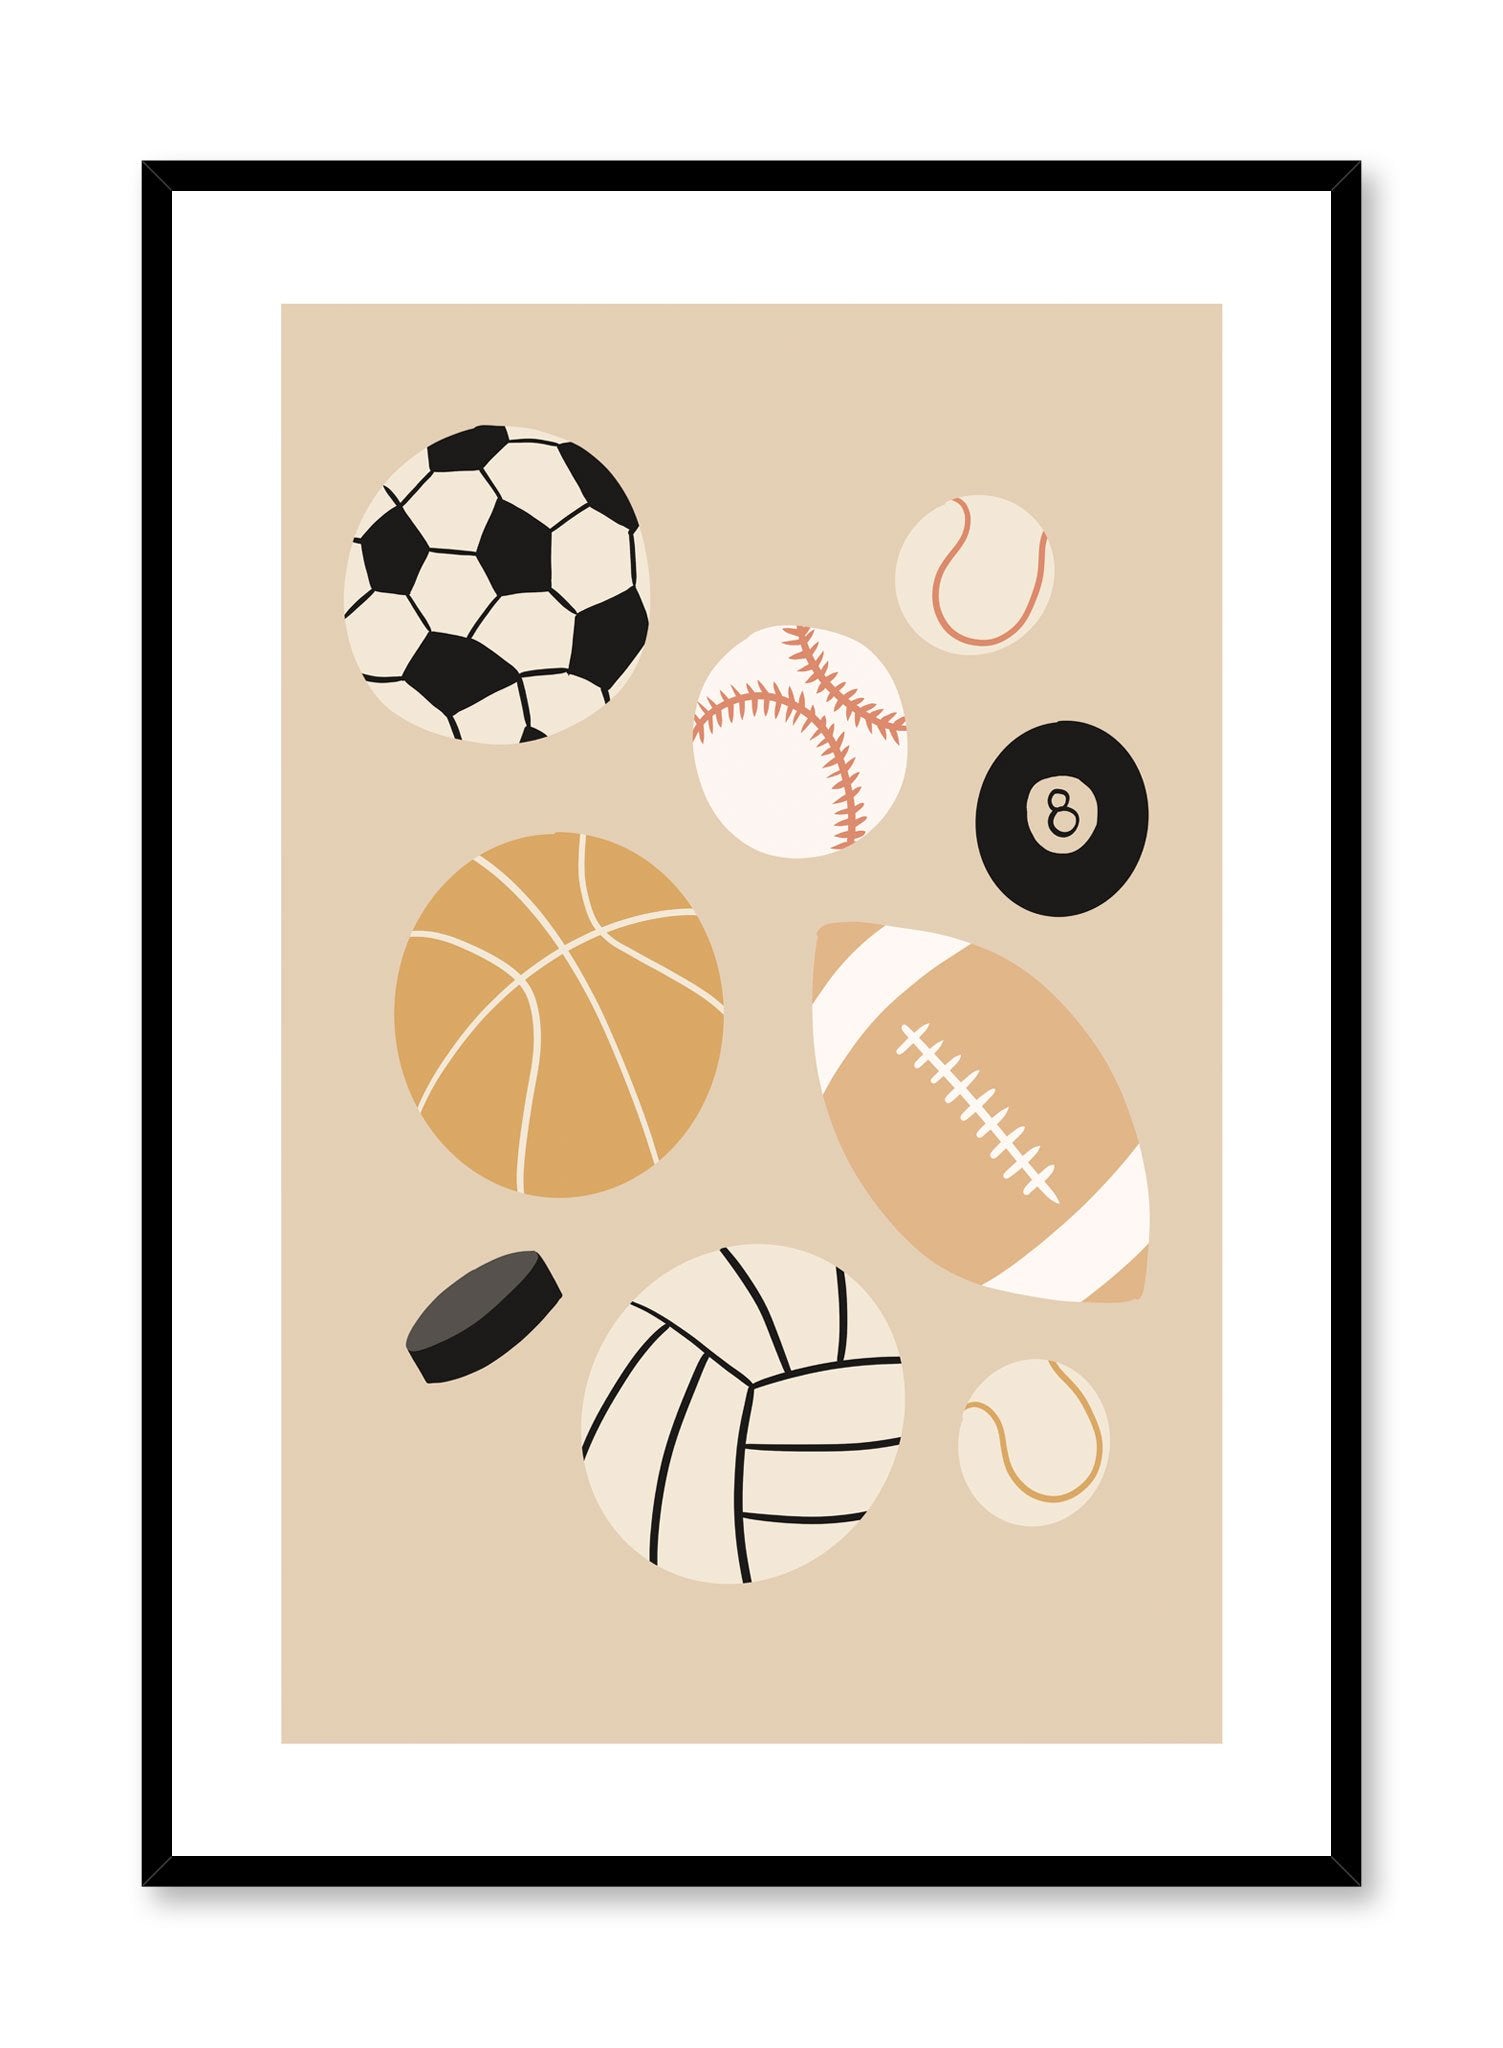 Catch! is a minimalist illustration by Opposite Wall of of various balls used in nine different sports.